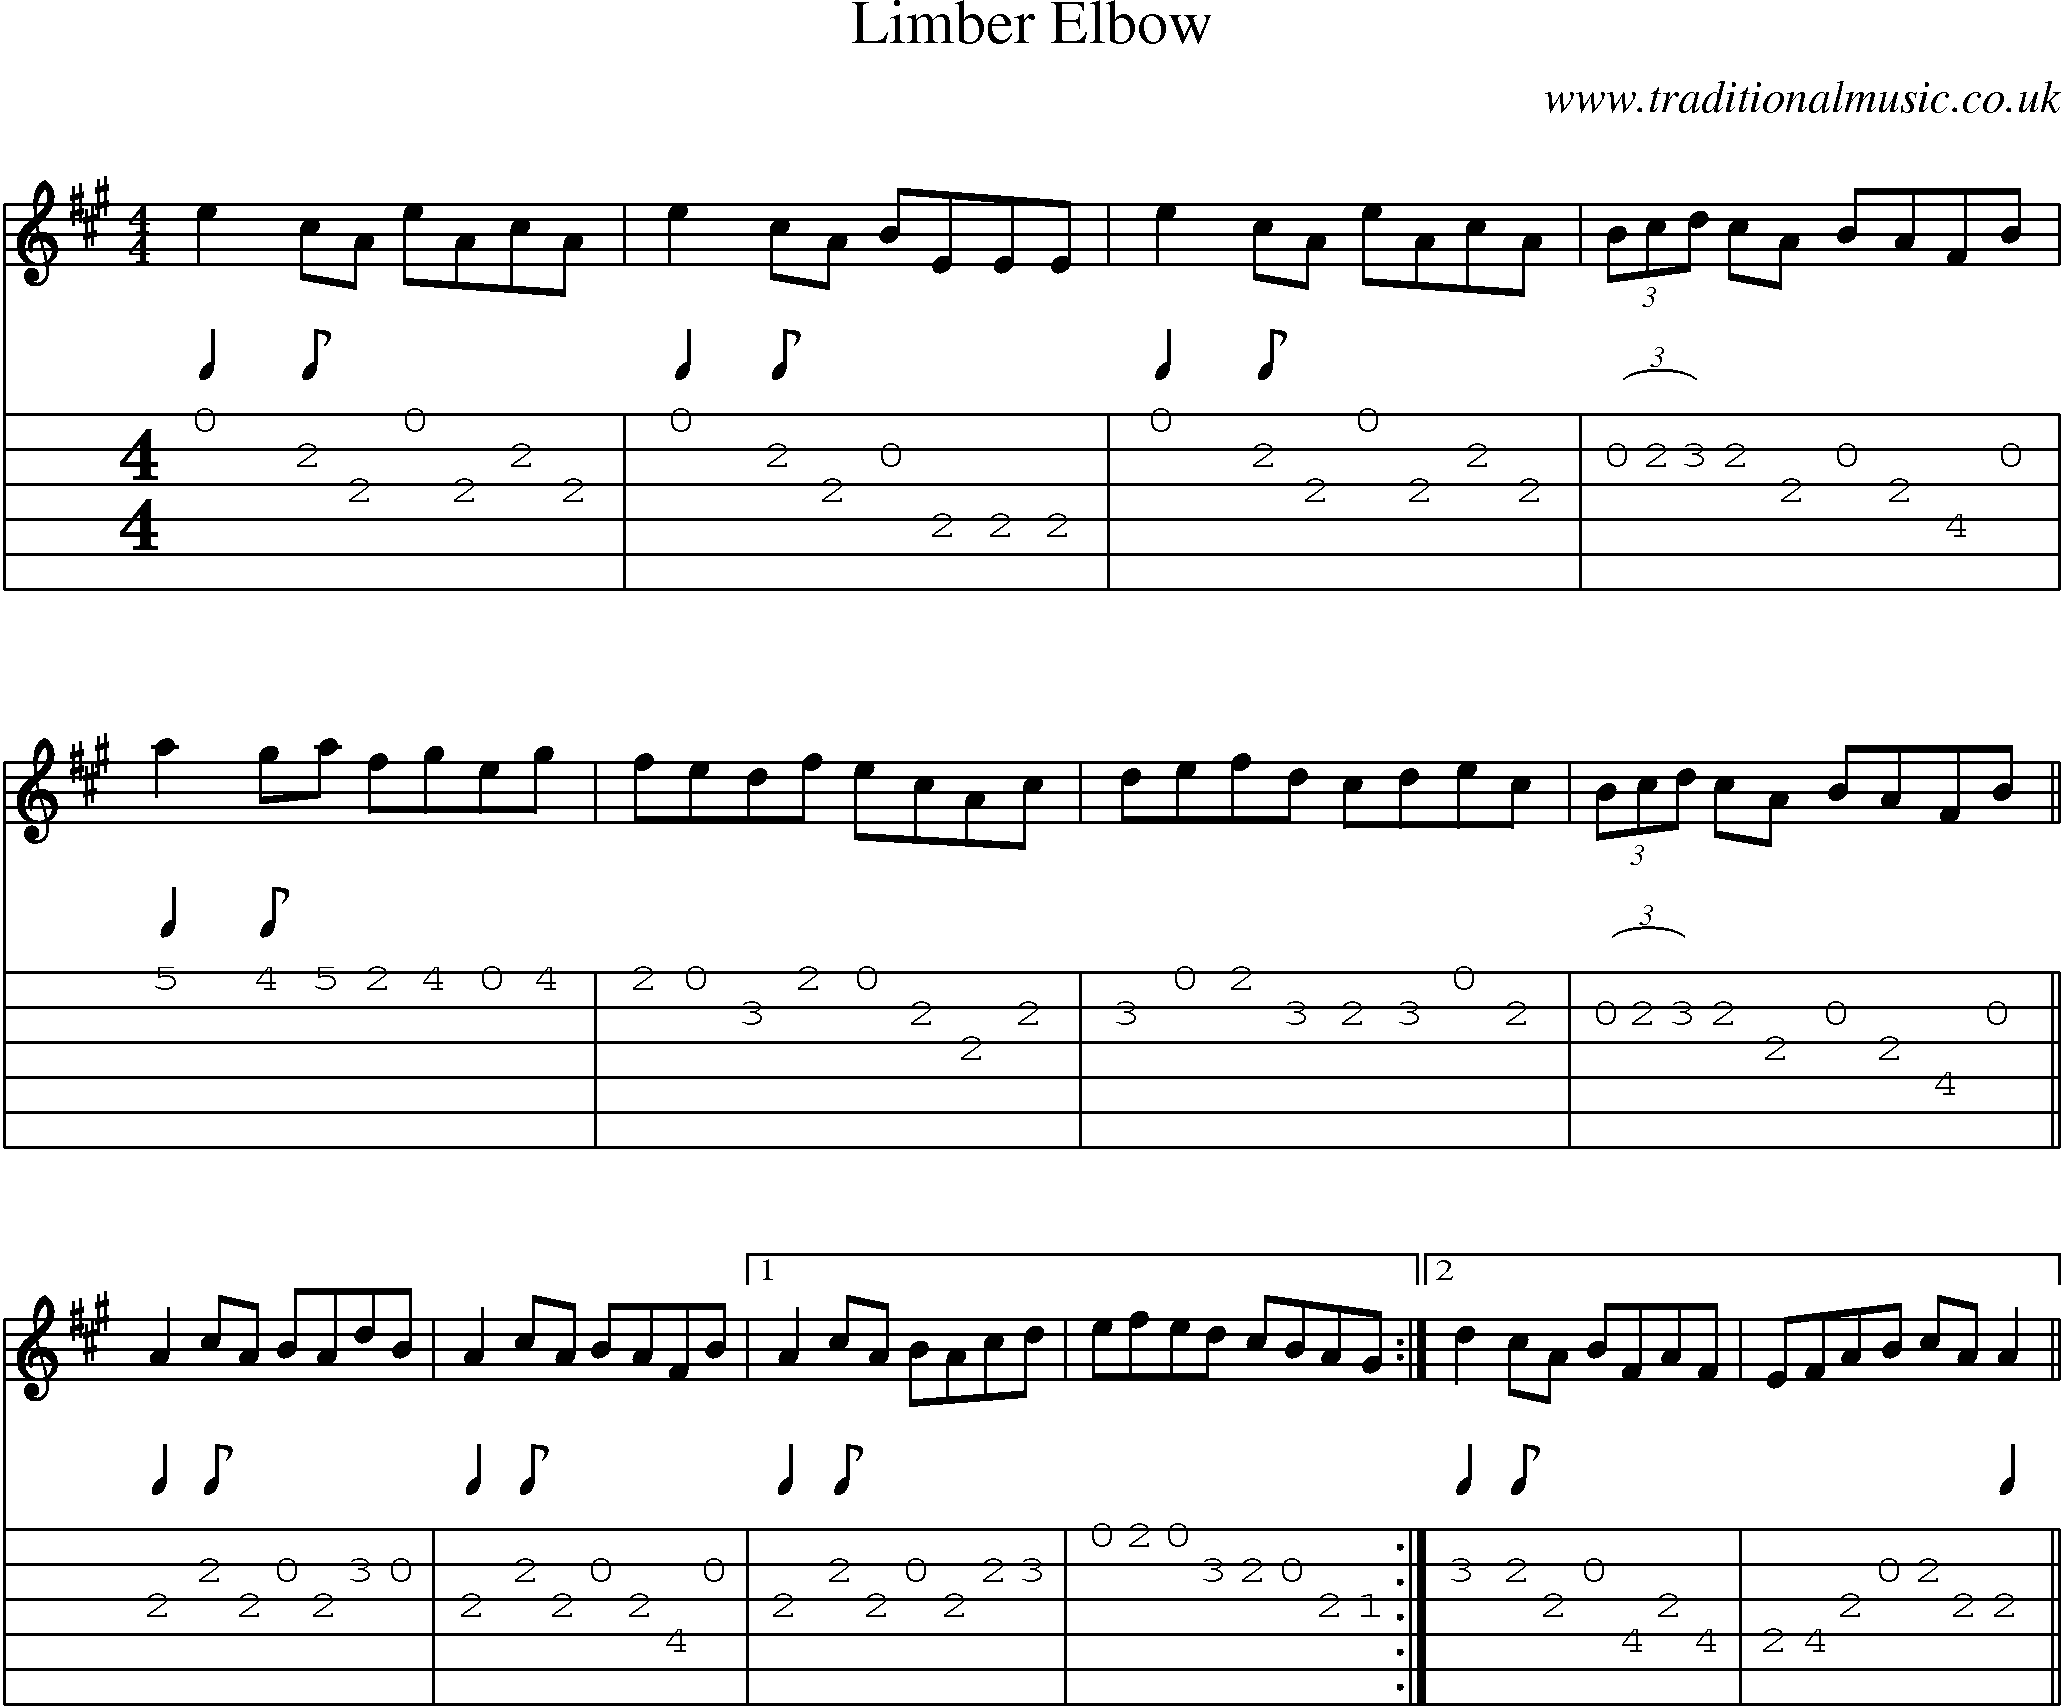 Music Score and Guitar Tabs for Limber Elbow